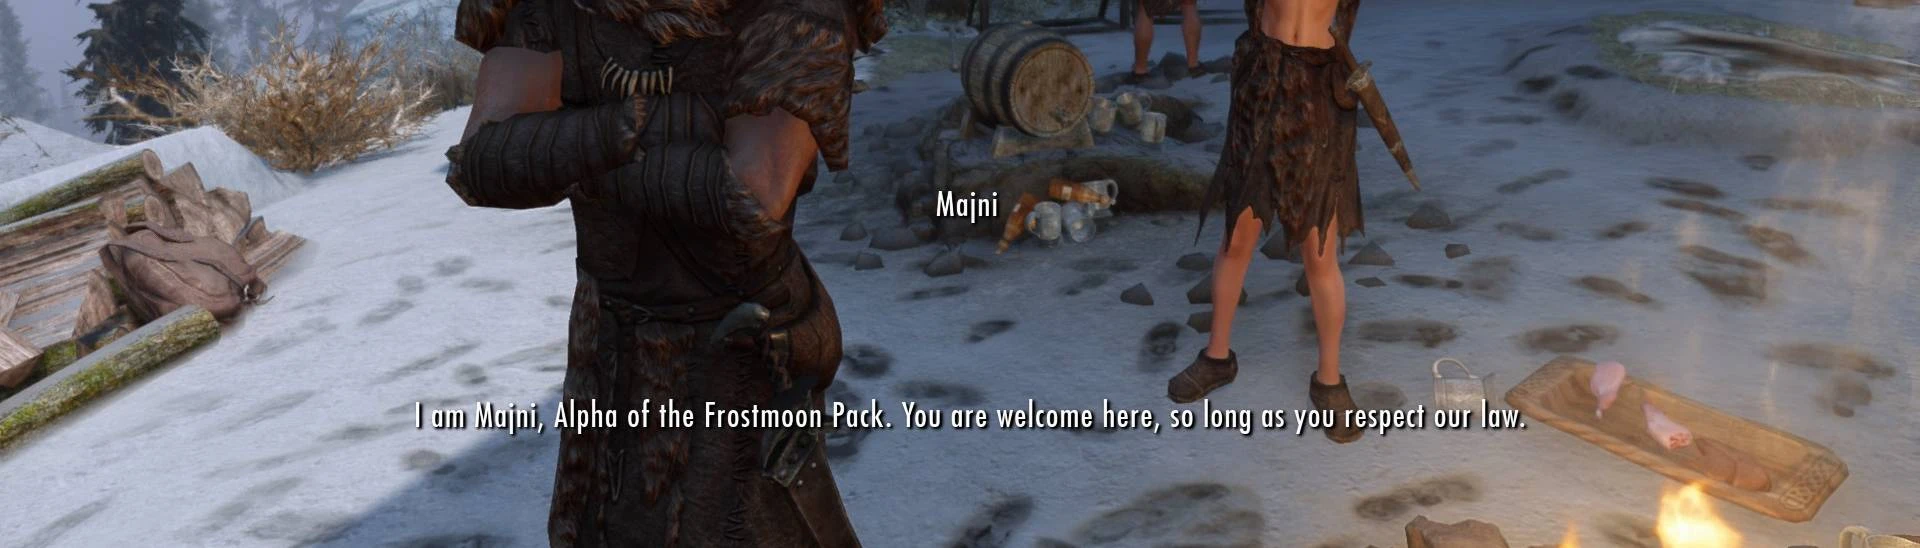 Frostmoon Access for Non-Werewolf at Skyrim Special Edition Nexus